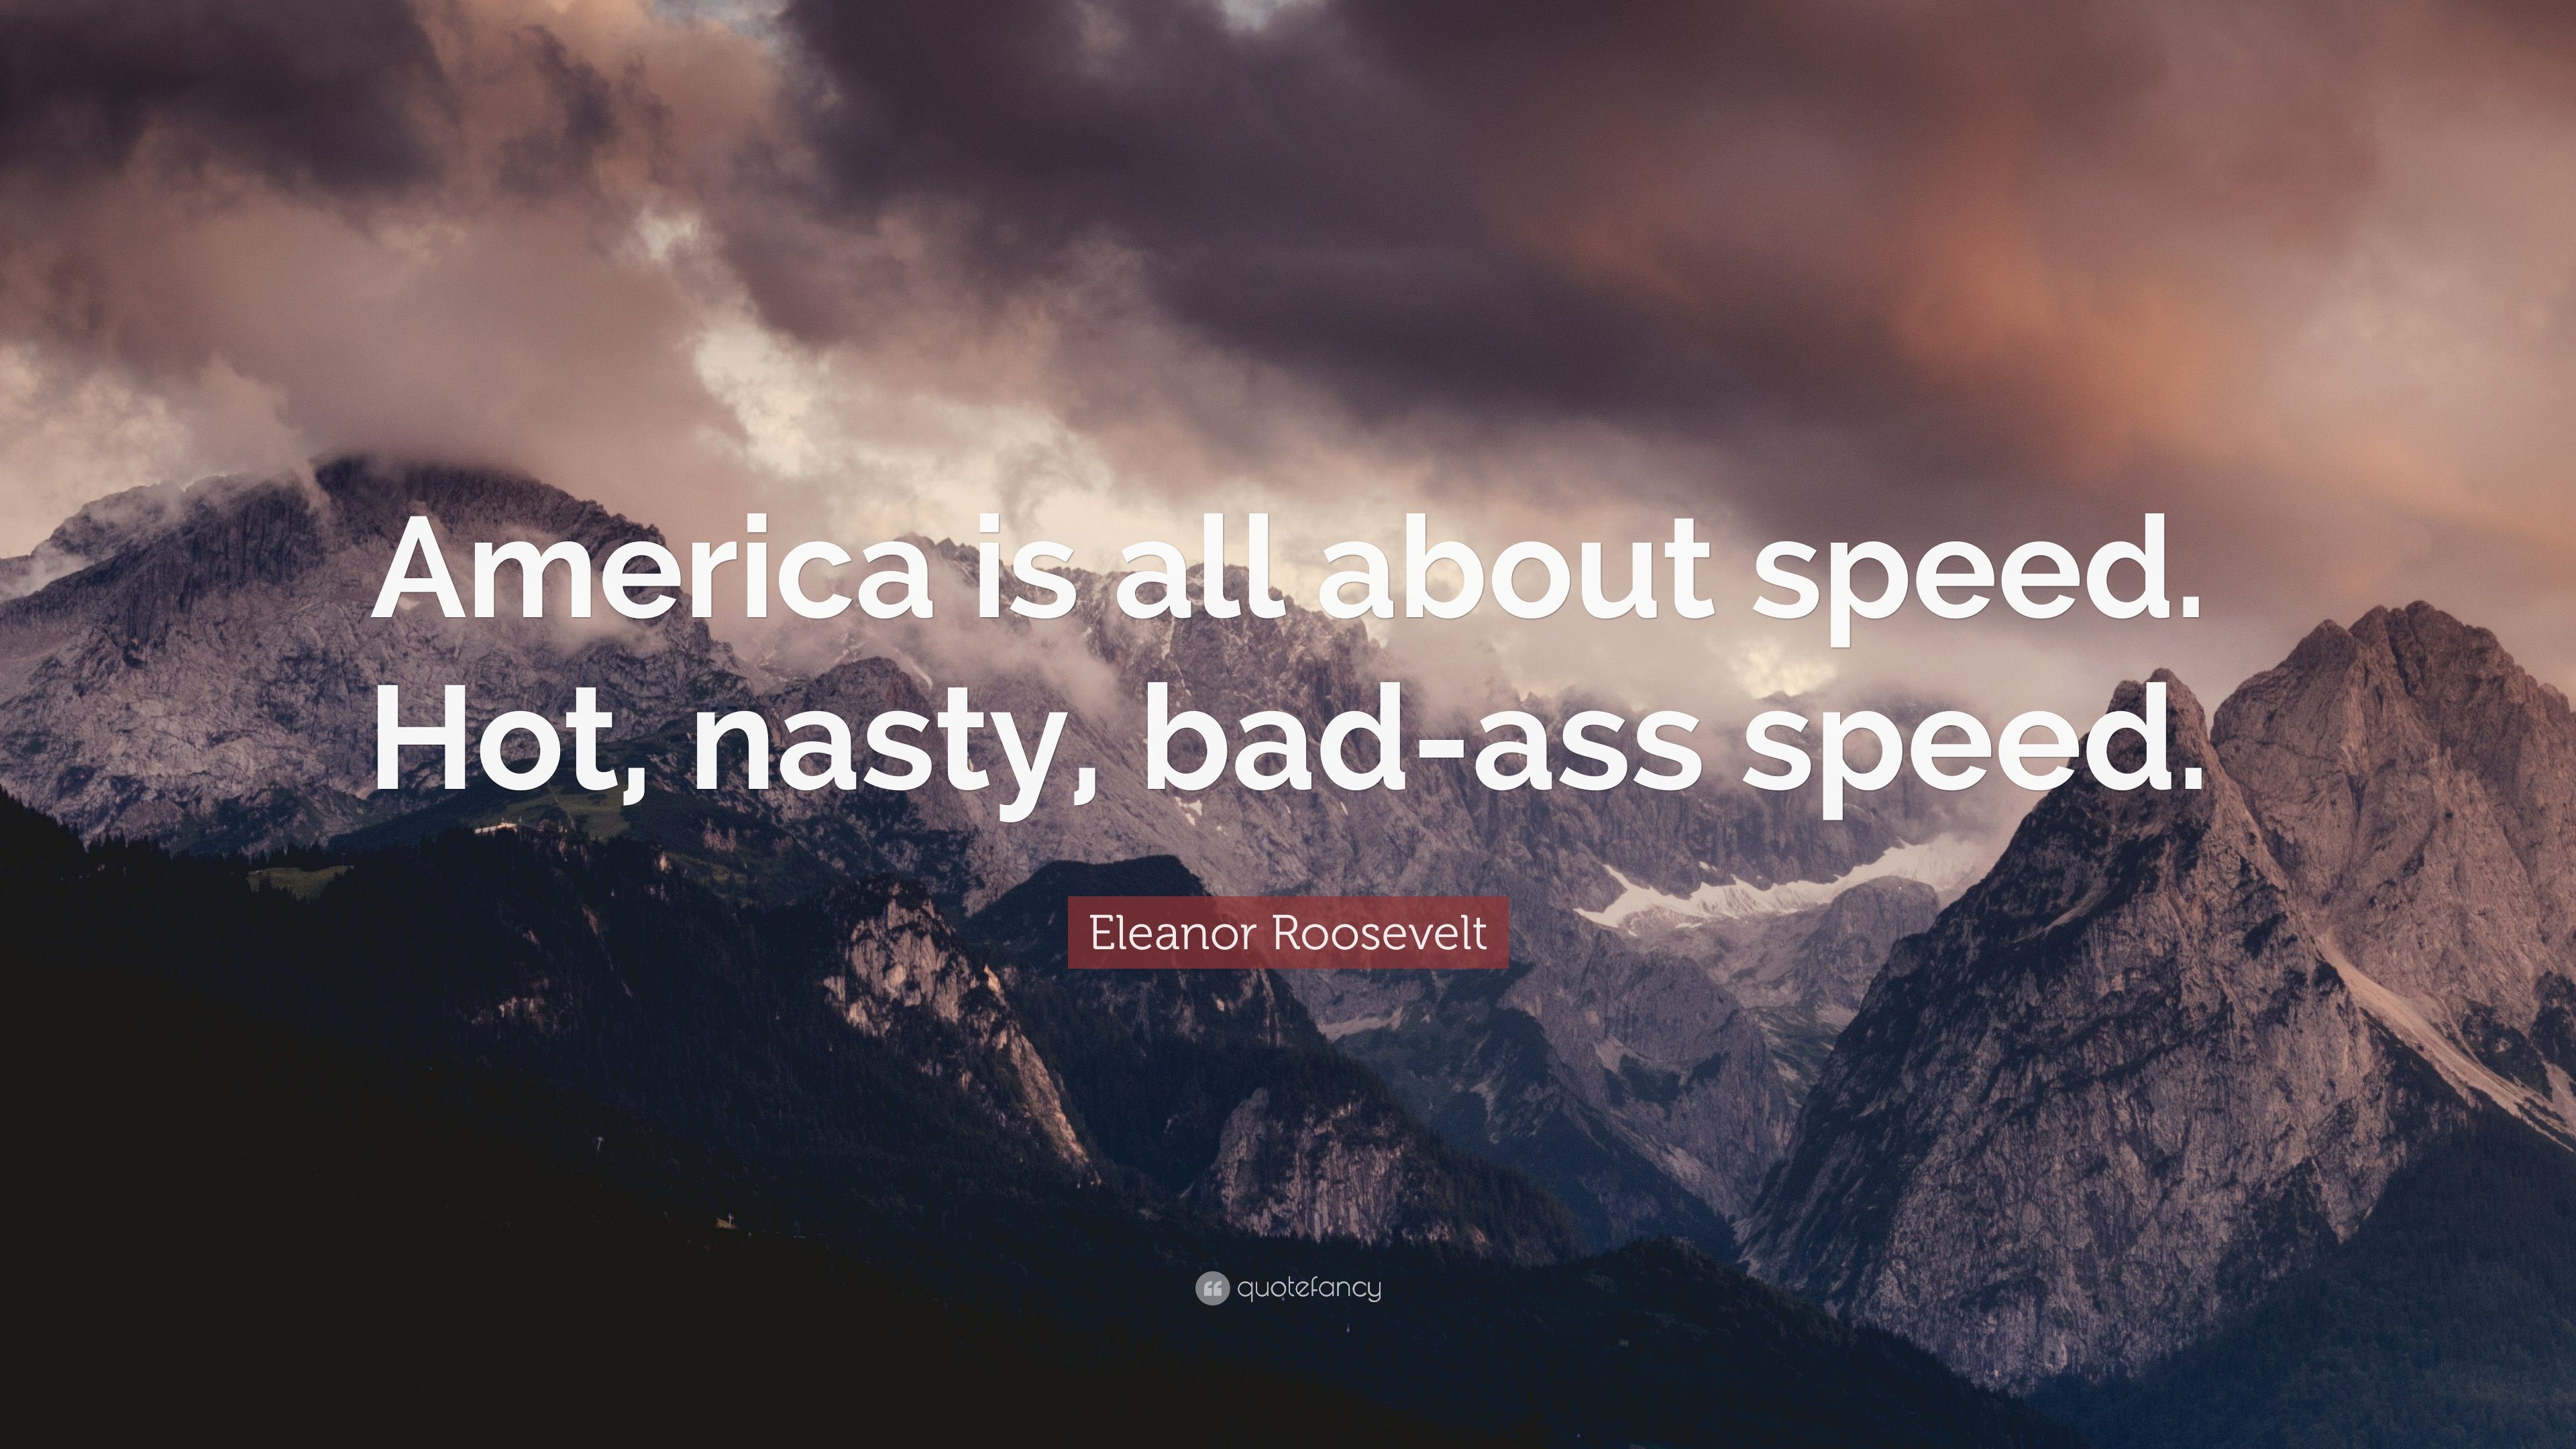 Eleanor Roosevelt Quote: “America is all about speed. Hot, nasty, bad